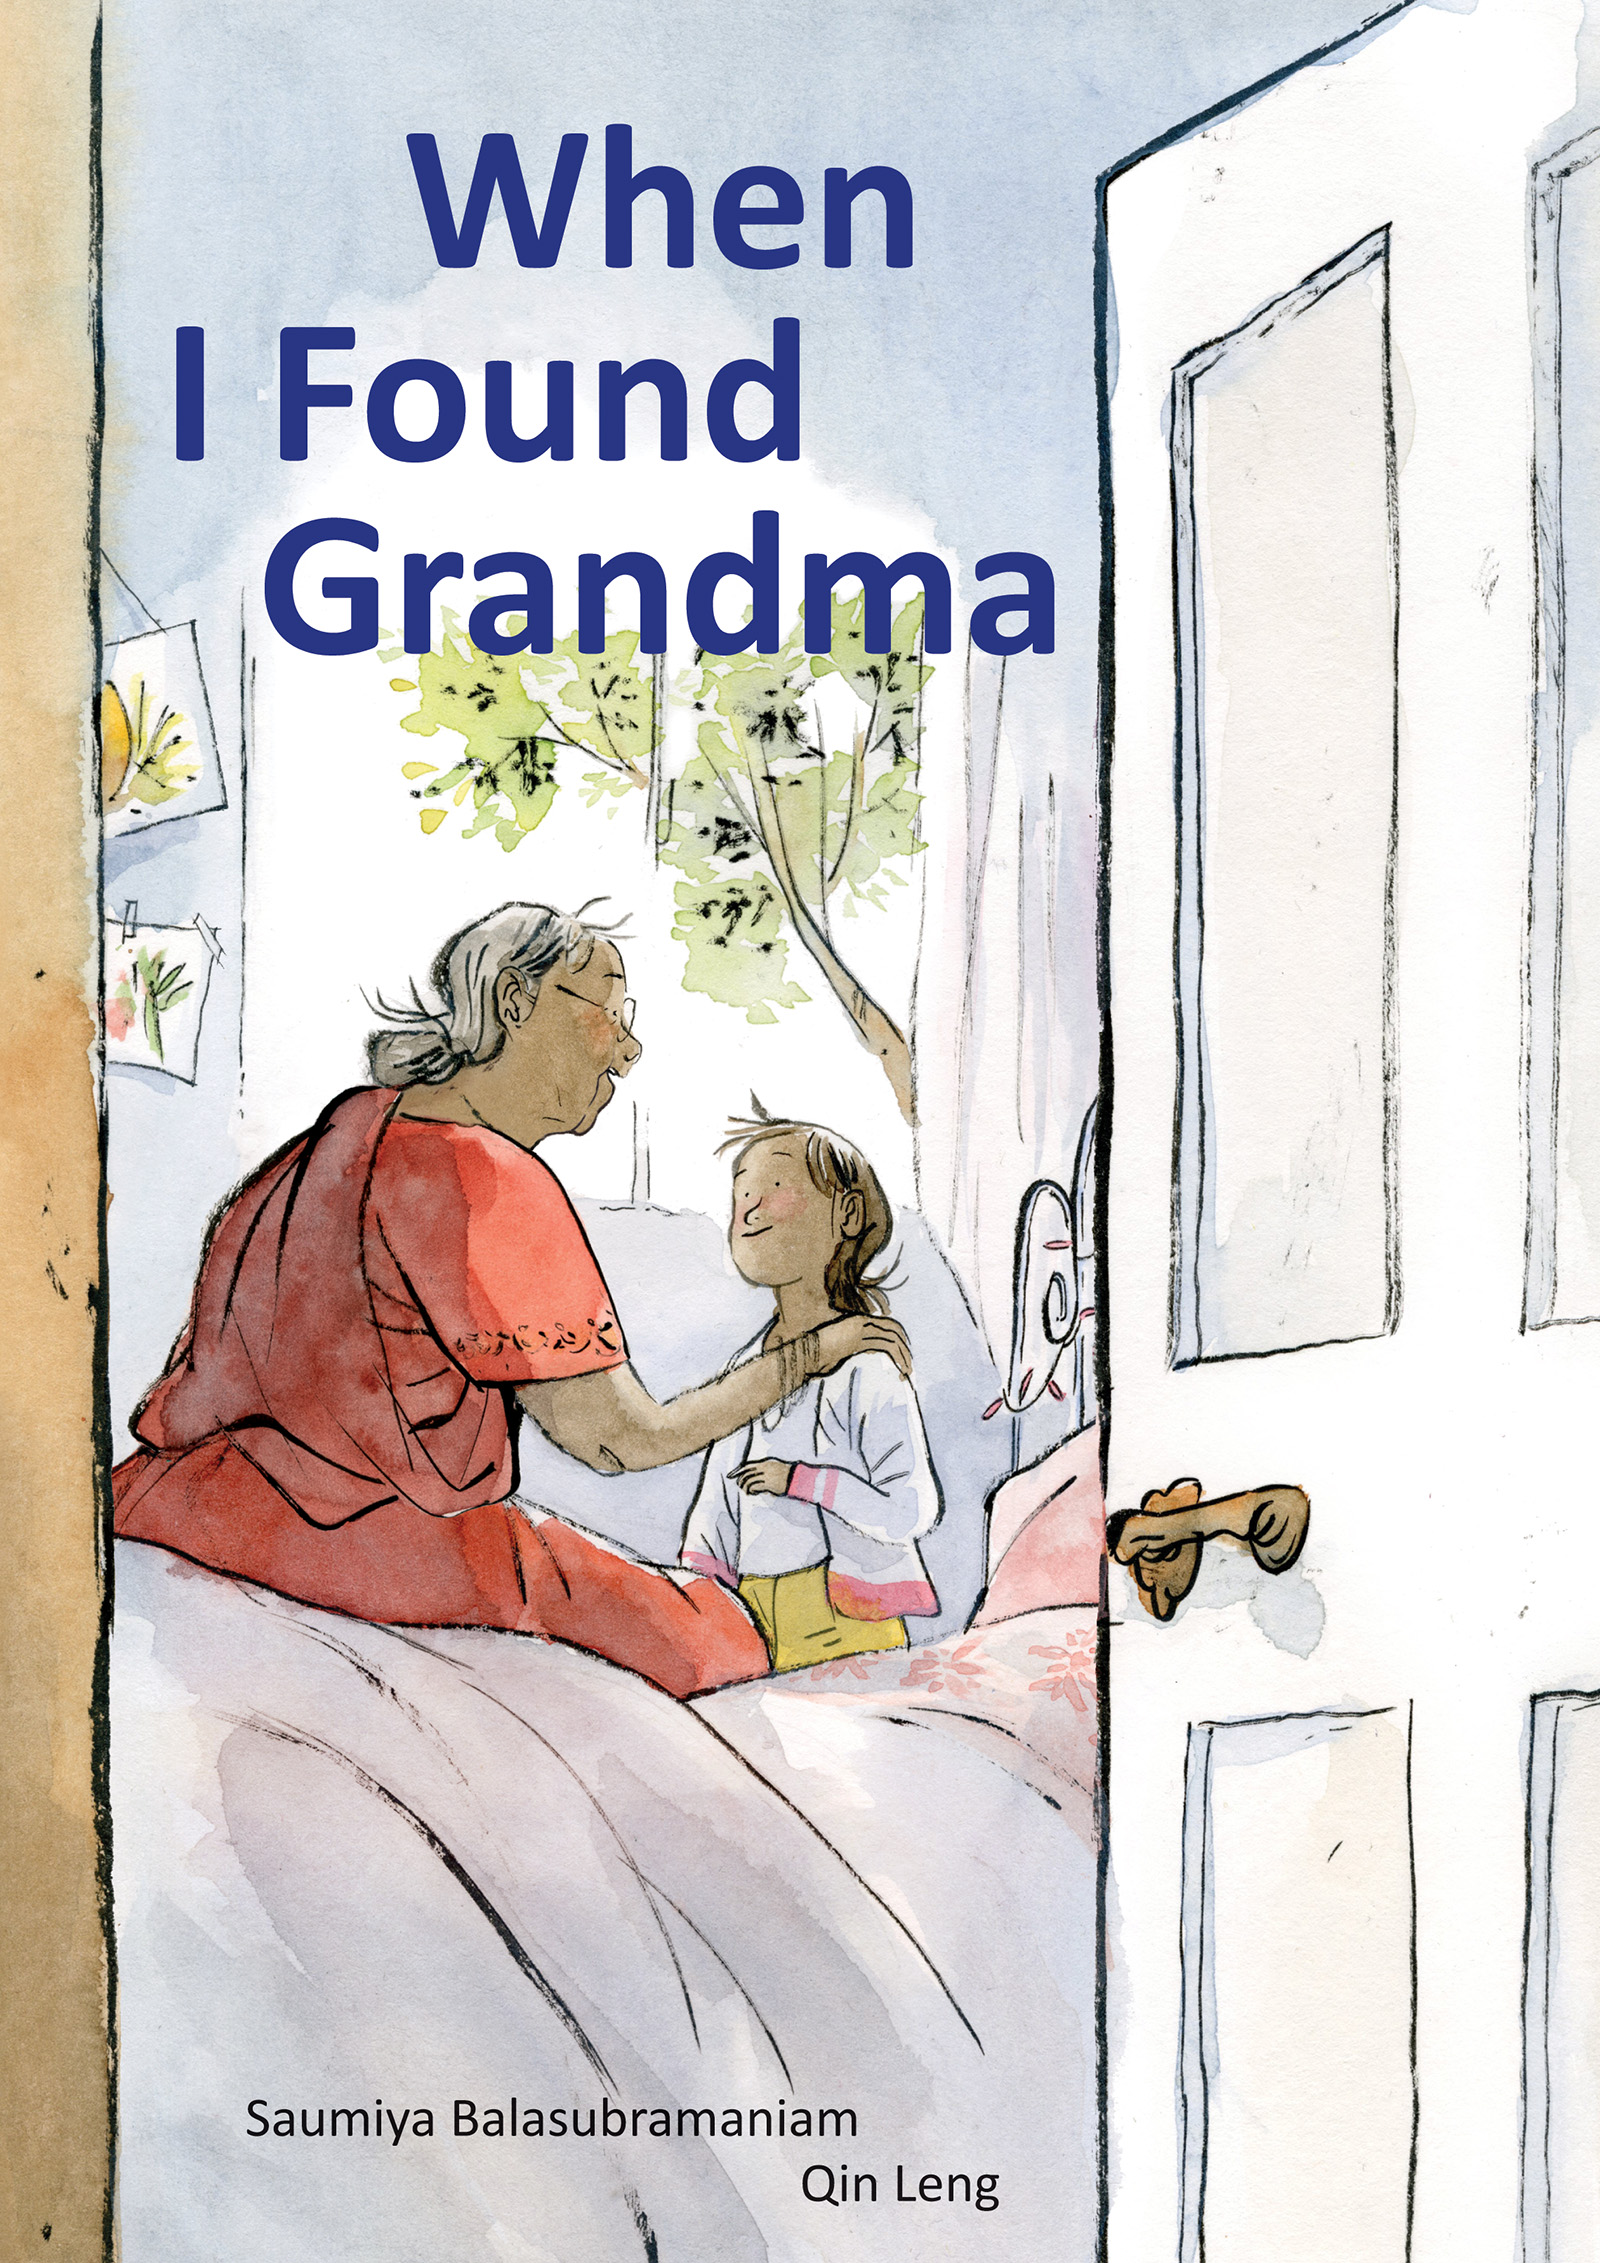 When I found Grandma by Qin Leng